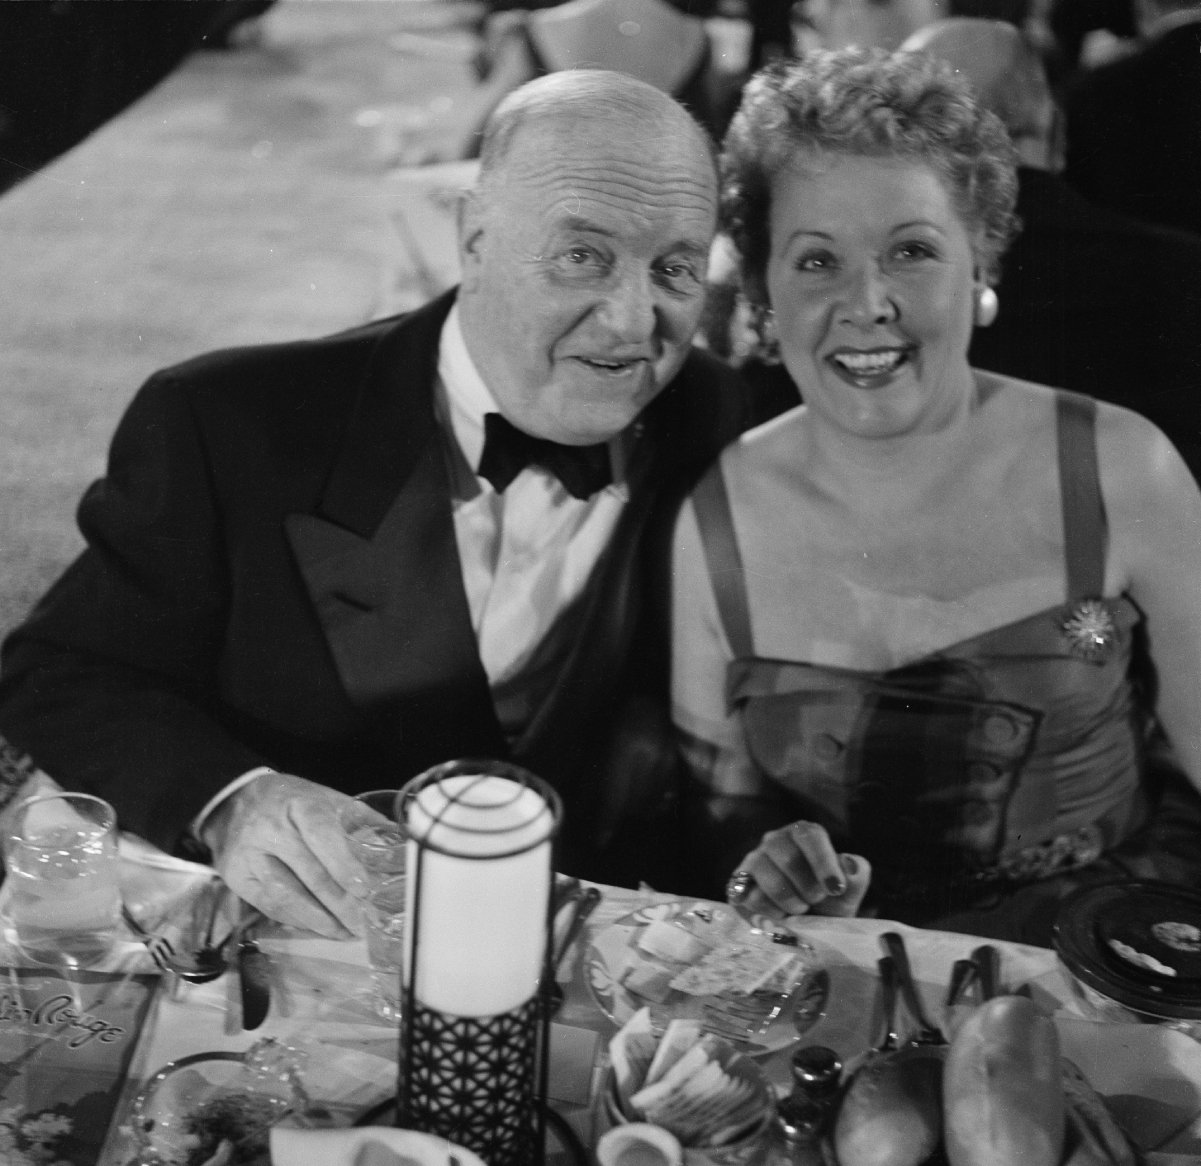 William Frawley and Vivian Vance at the 1955 Emmy Awards ceremony